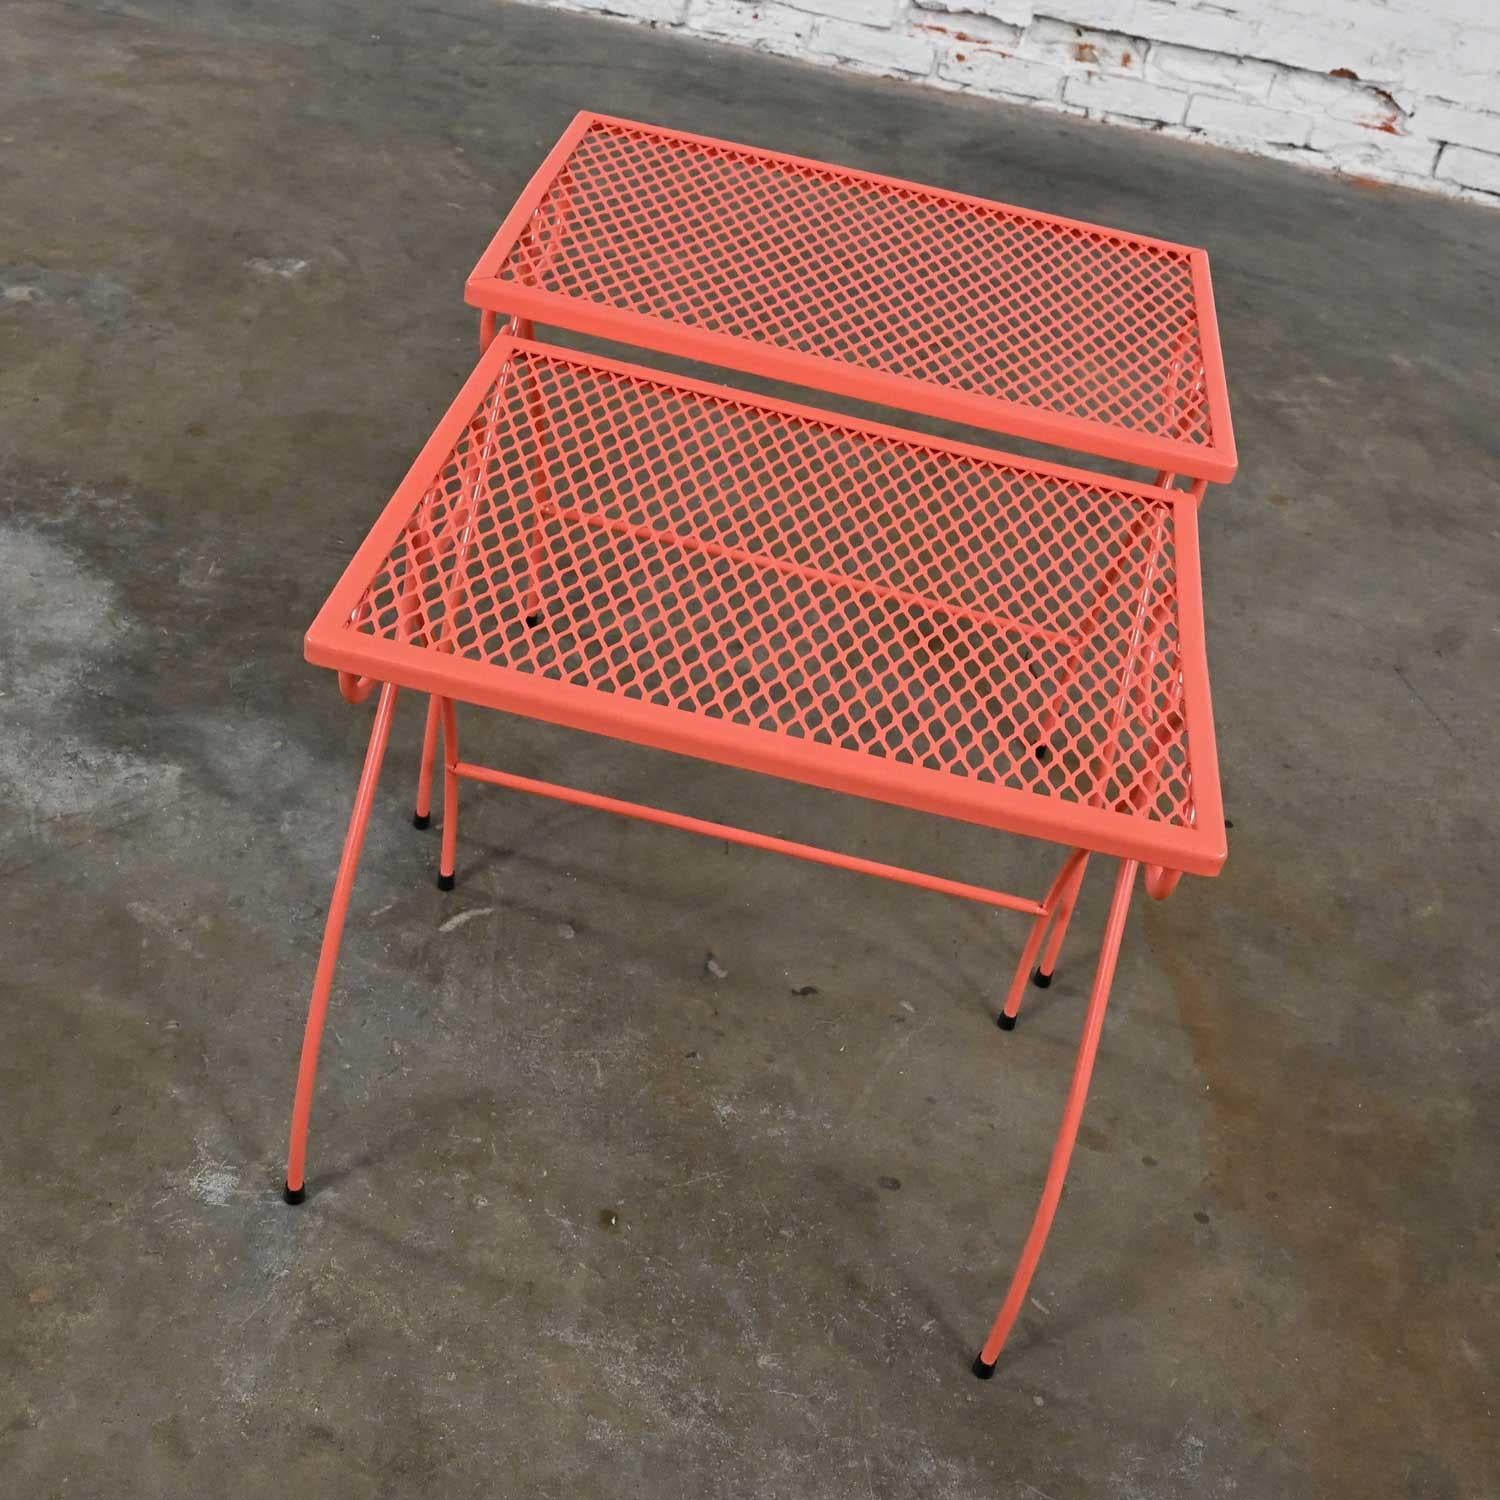 Fabulous vintage Mid-20th Century MCM (Mid-Century Modern) coral painted metal wire famed with expanded metal mesh top outdoor nesting tables, a pair. Beautiful condition, keeping in mind that these are vintage and not new so will have signs of use